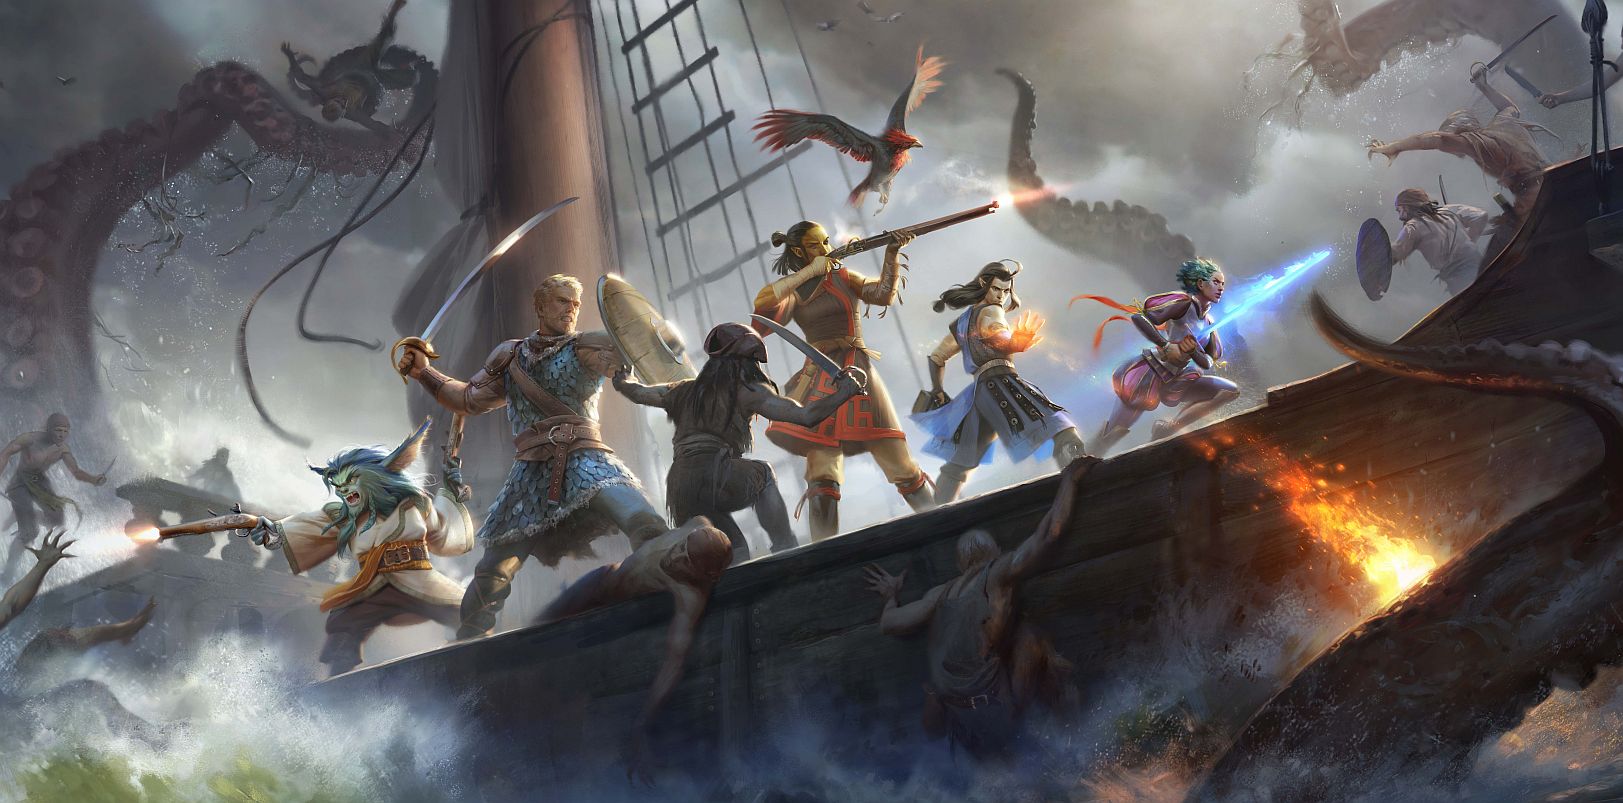 Image for Pillars of Eternity 2: Deadfire in development, crowdfunding campaign kicks off on Fig